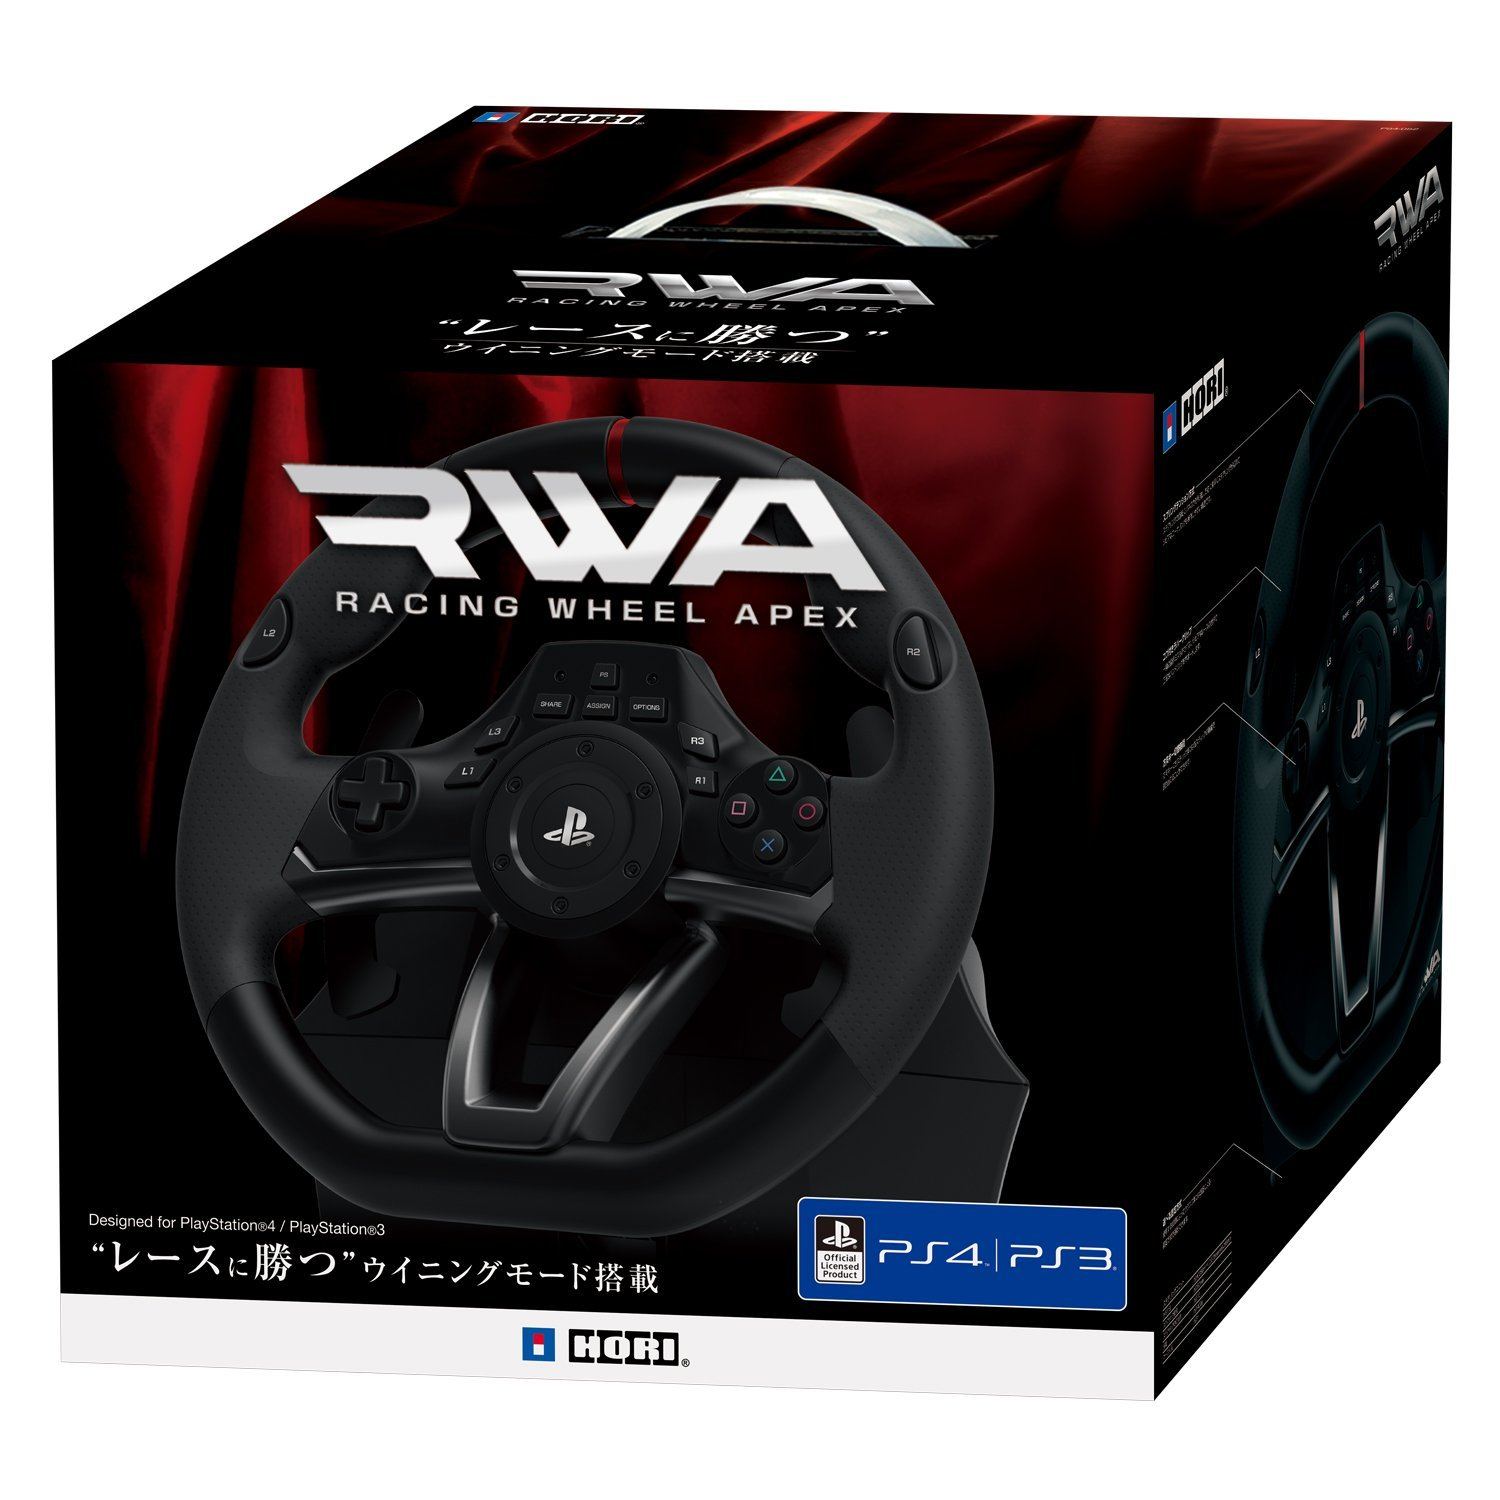 Racing Wheel Apex for PlayStation 4 for PC, PS3, PS3 Slim, PS4